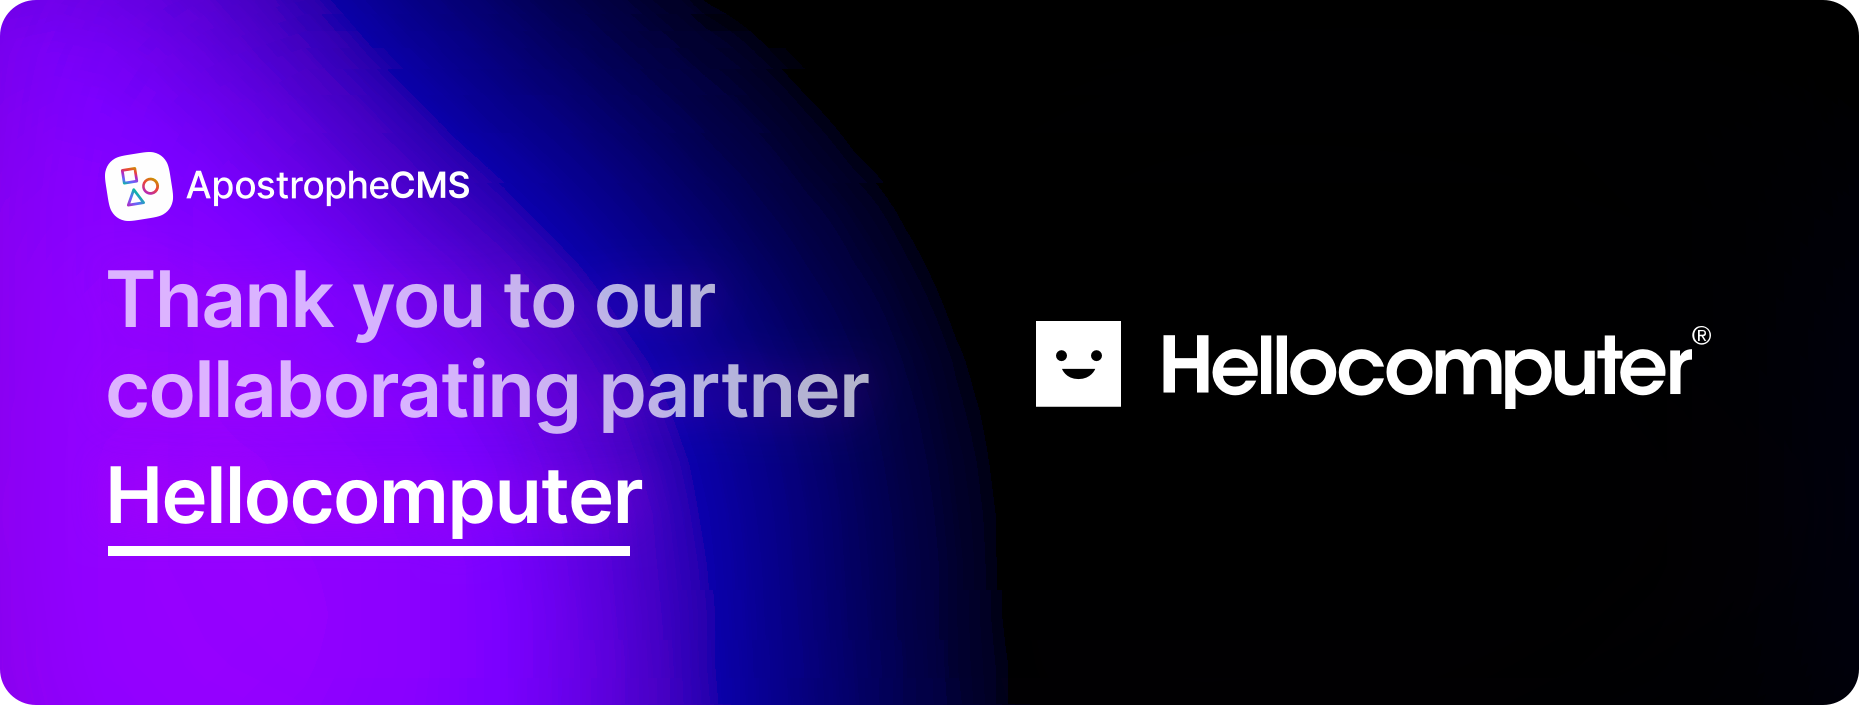 Thanks to our partner Hellocomputer